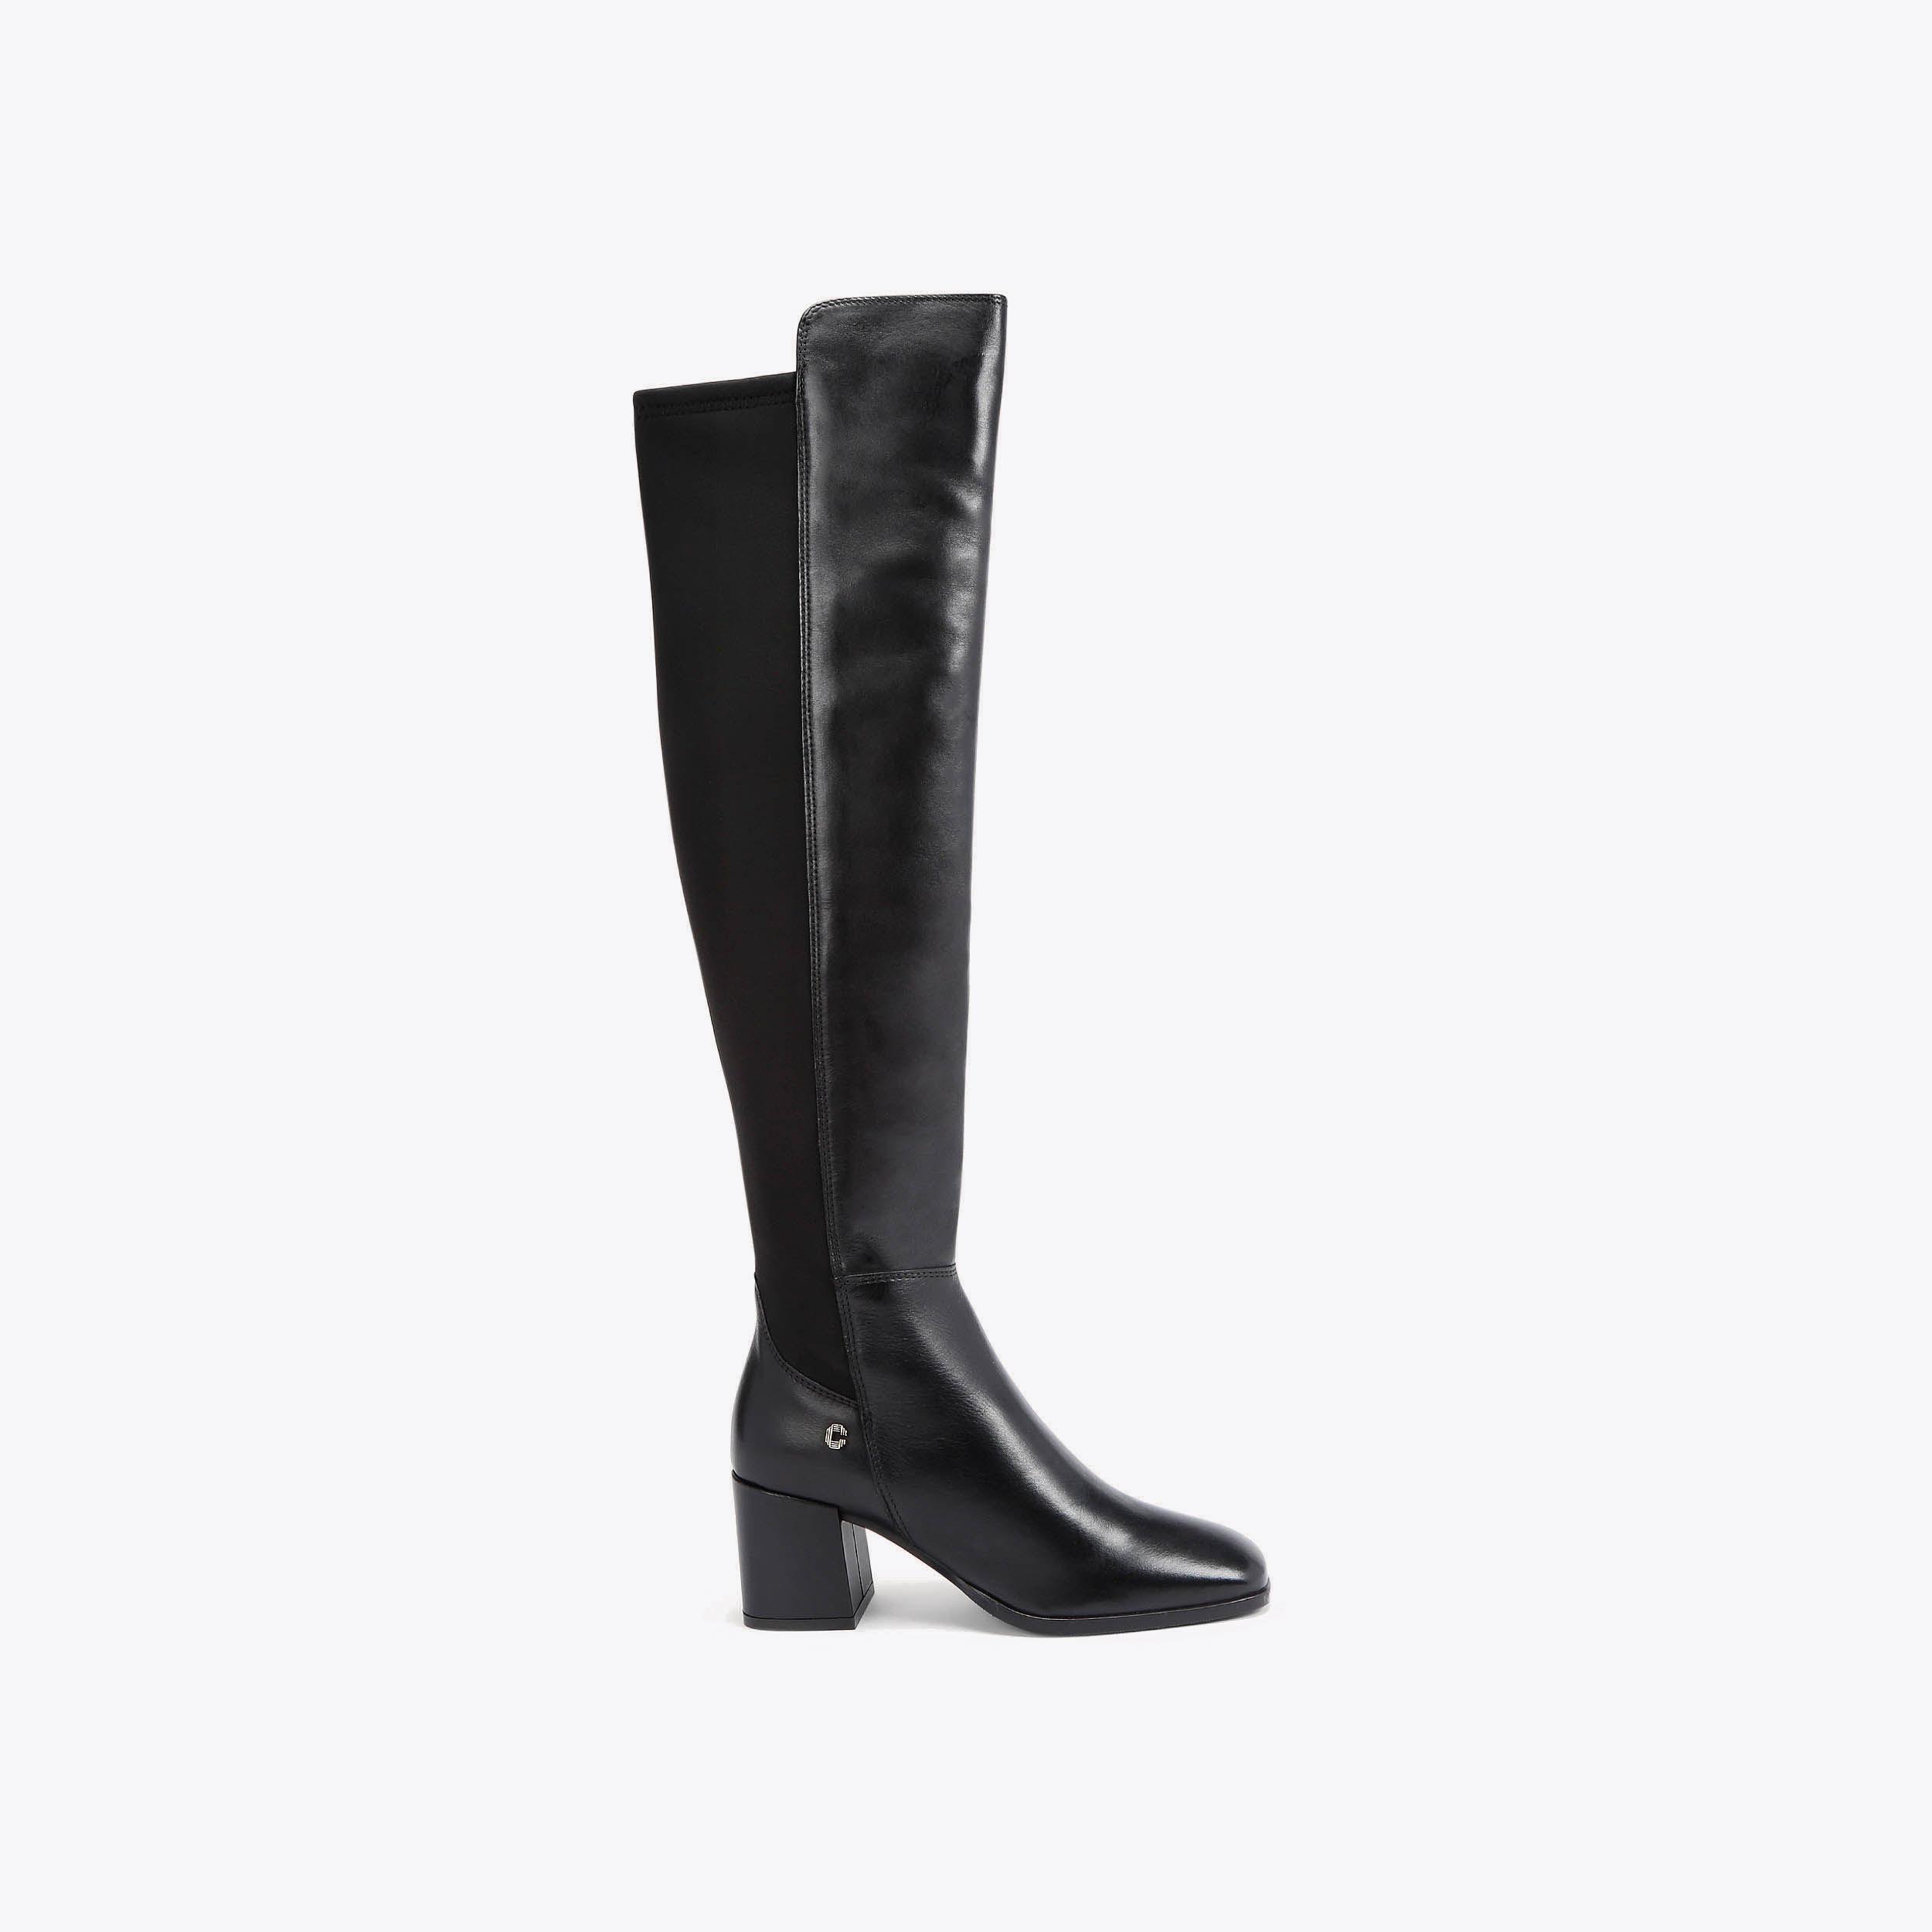 SOOTHE OTK Black Leather Over The Knee Boot by CARVELA COMFORT